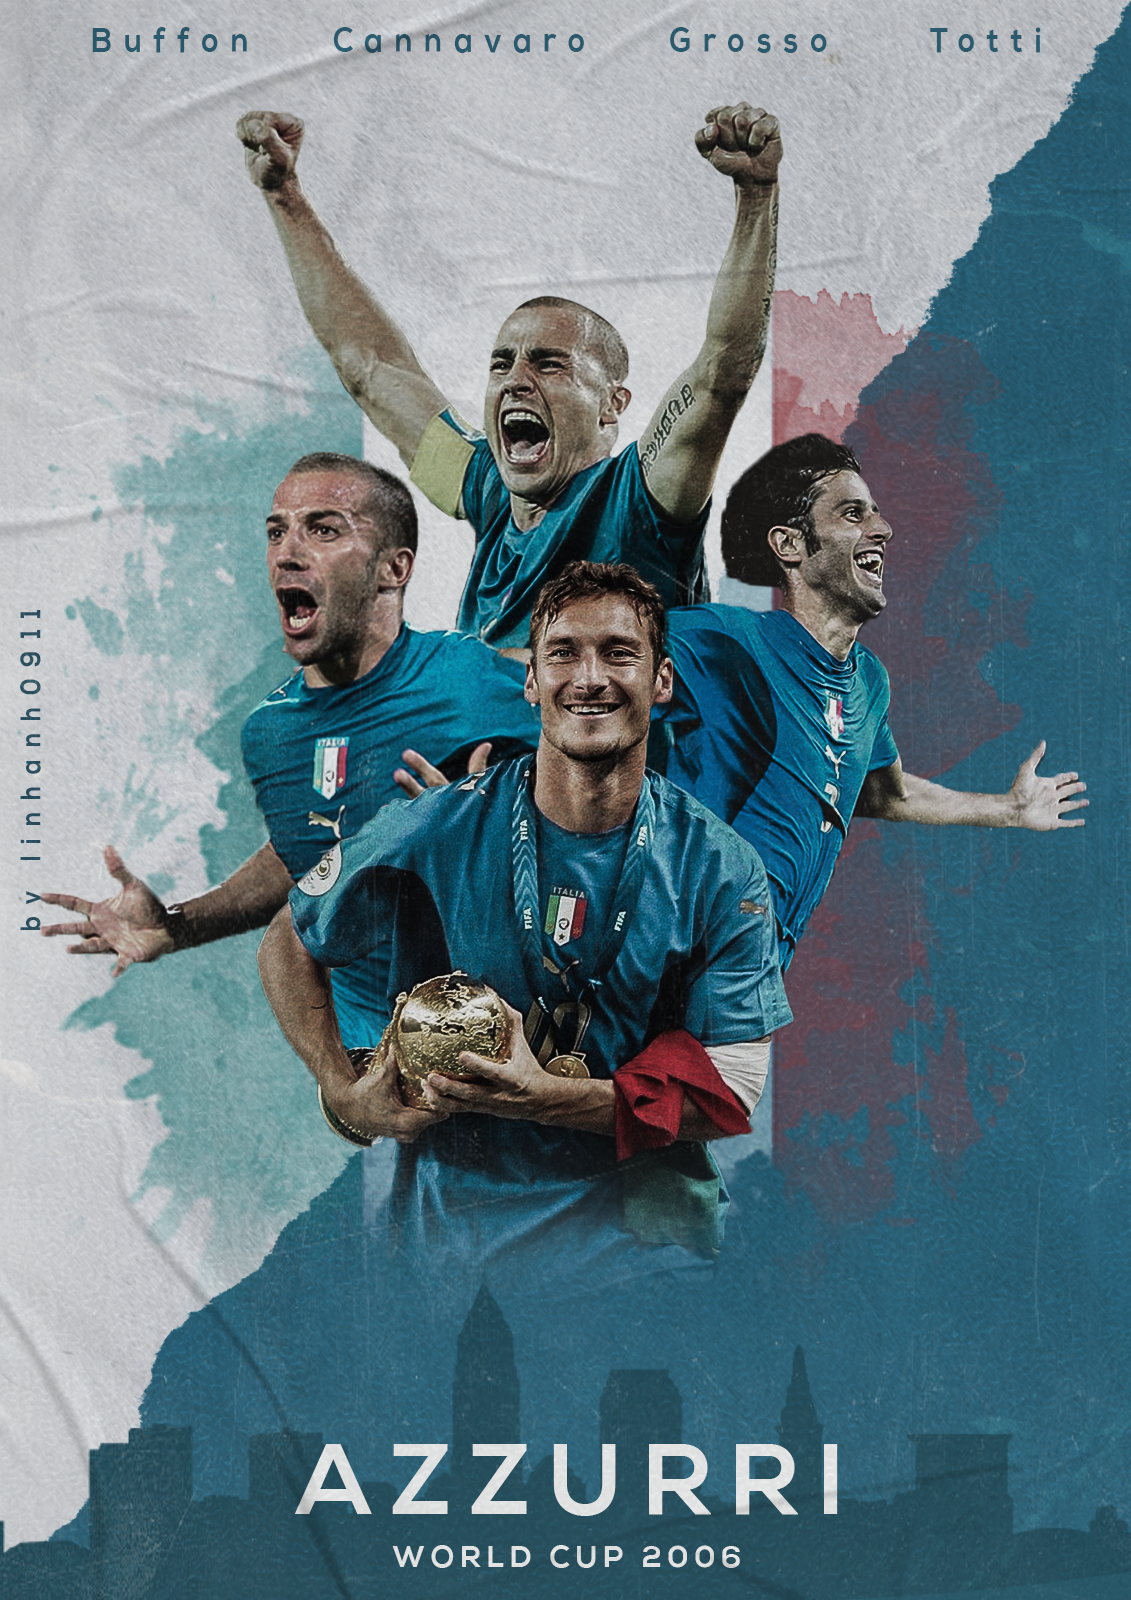 SAW WorldCup 2022 - When in Rome by andreshanti on DeviantArt